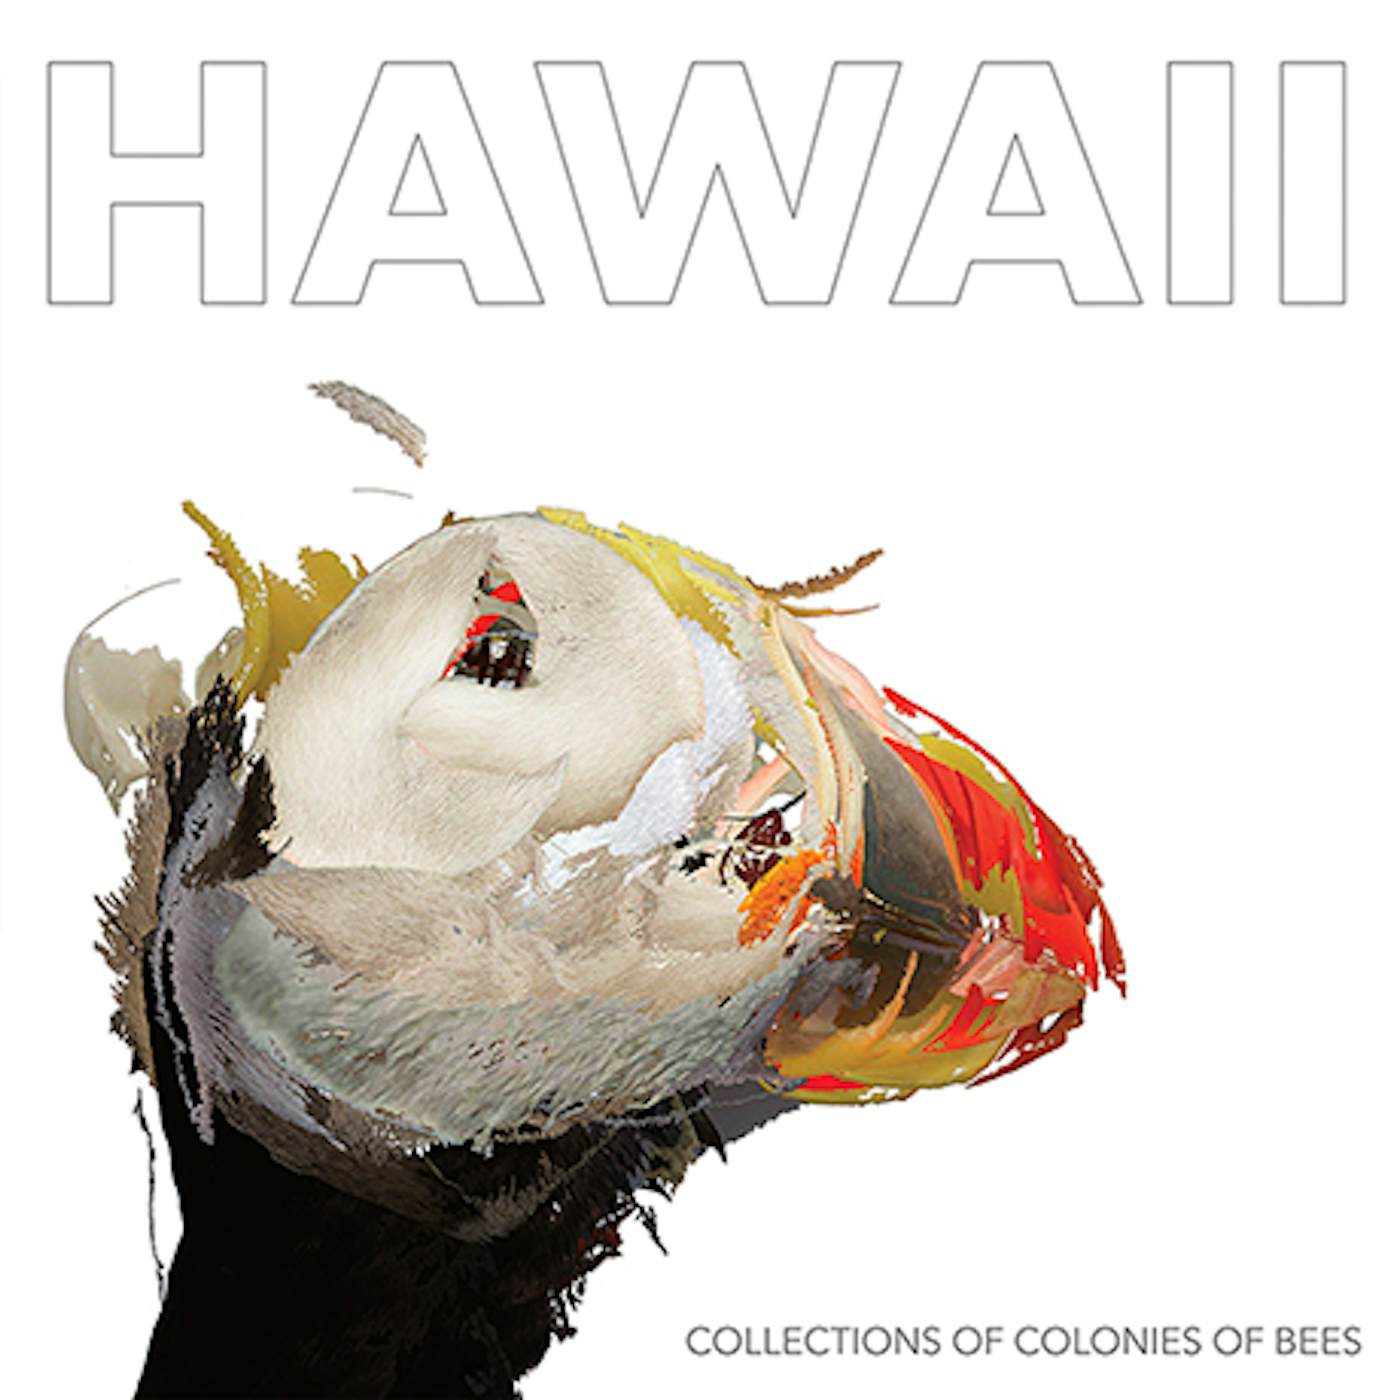 Collections Of Colonies Of Bees HAWAII (Garage Sale)